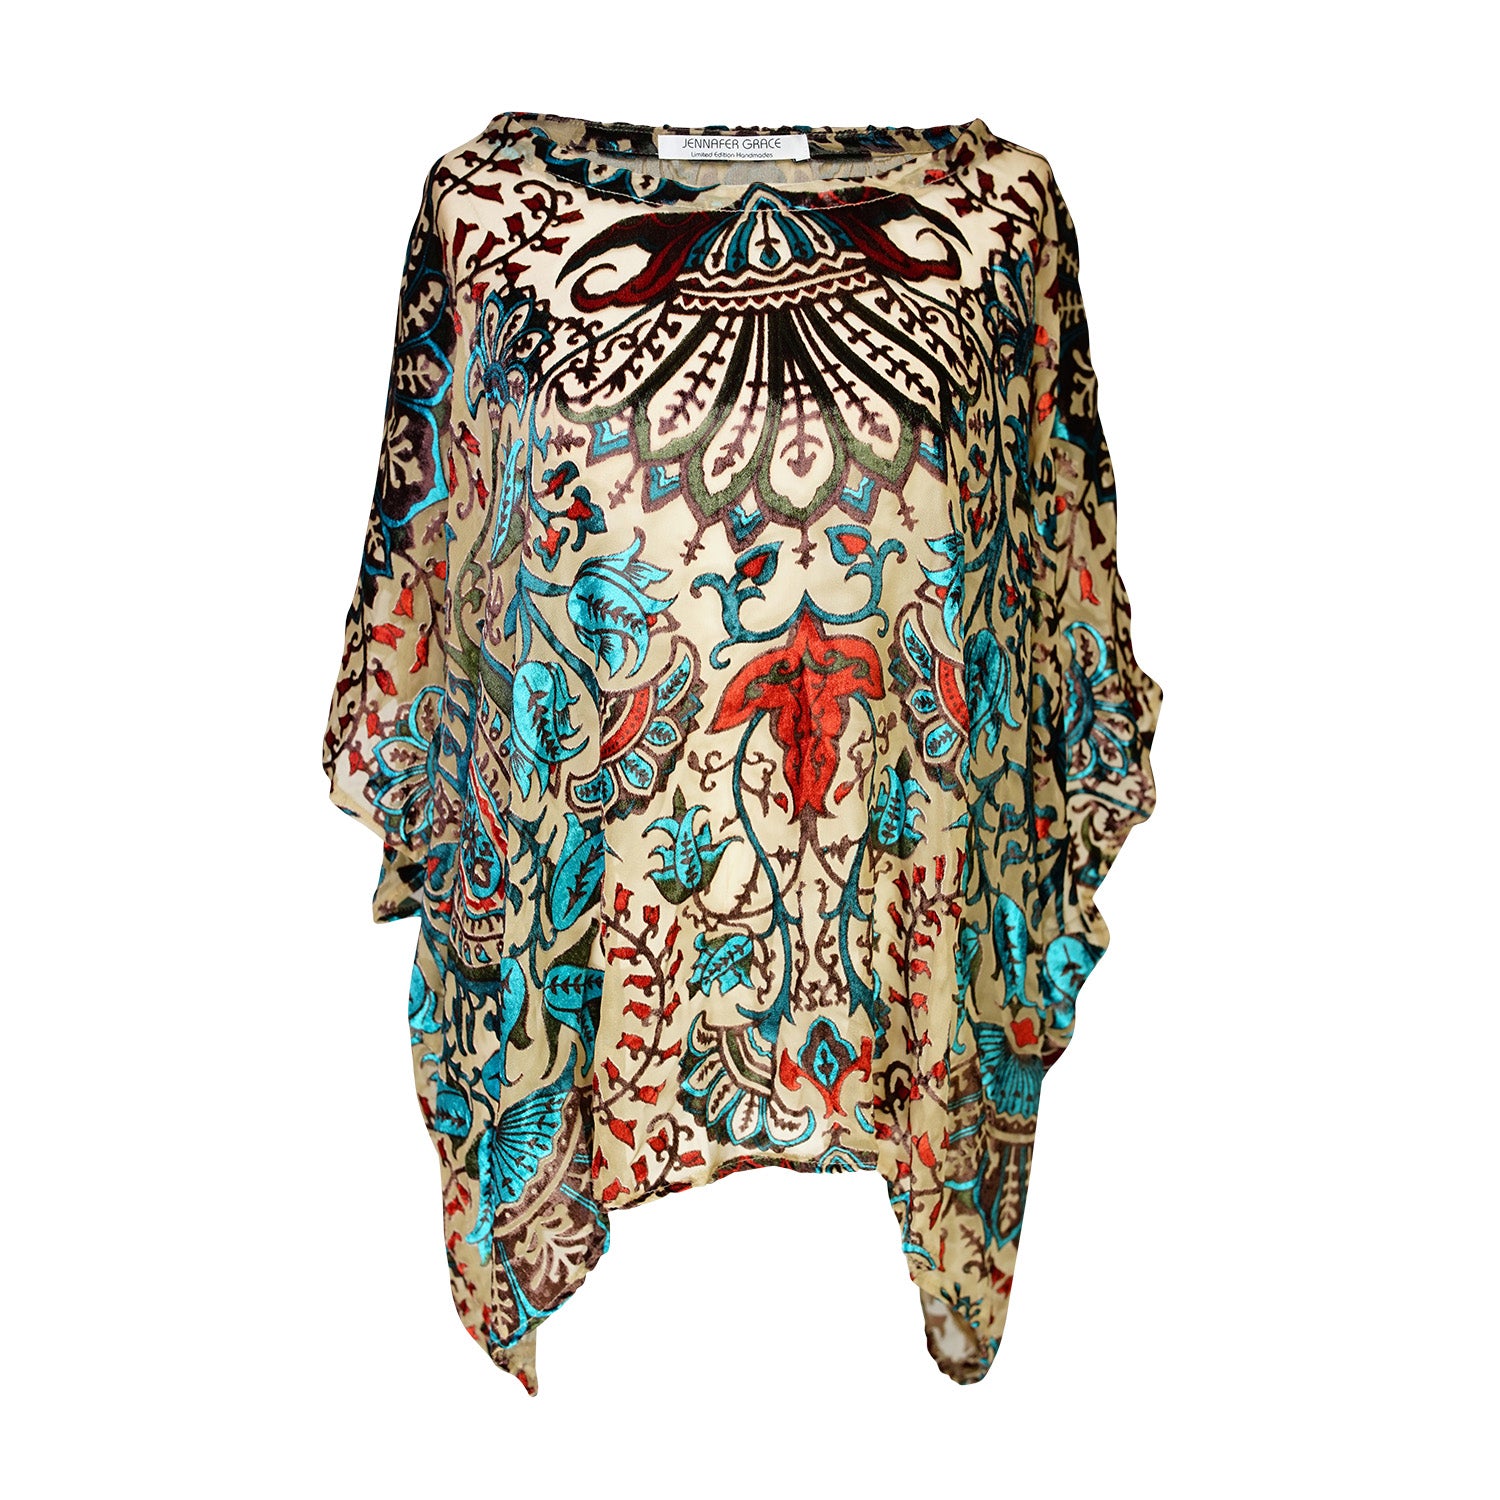 jennafer grace Desert Teal Velvet Burnout scarf top beige mesh with art deco inspired red and teal design boho bohemian hippie romantic whimsical resort lounge holiday evening wear retro 20s 30s 1920s 1930s unisex handmade in california usa